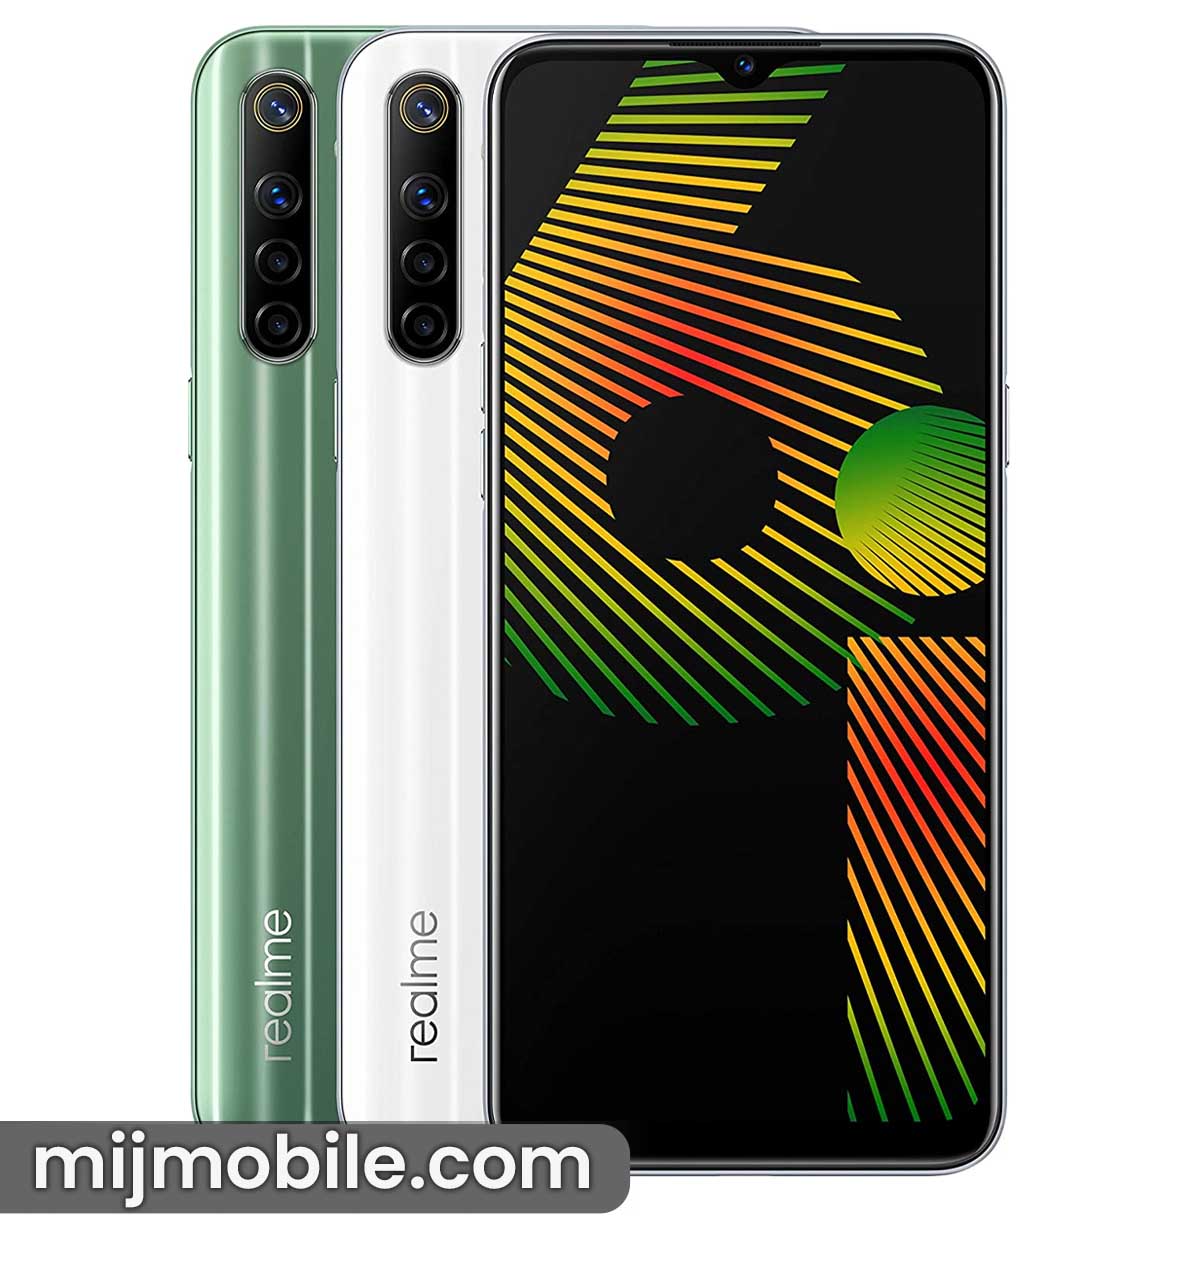 Realme 6i Price in Pakistan & Specifications Realme 6i Price in Pakistan is 29,999.